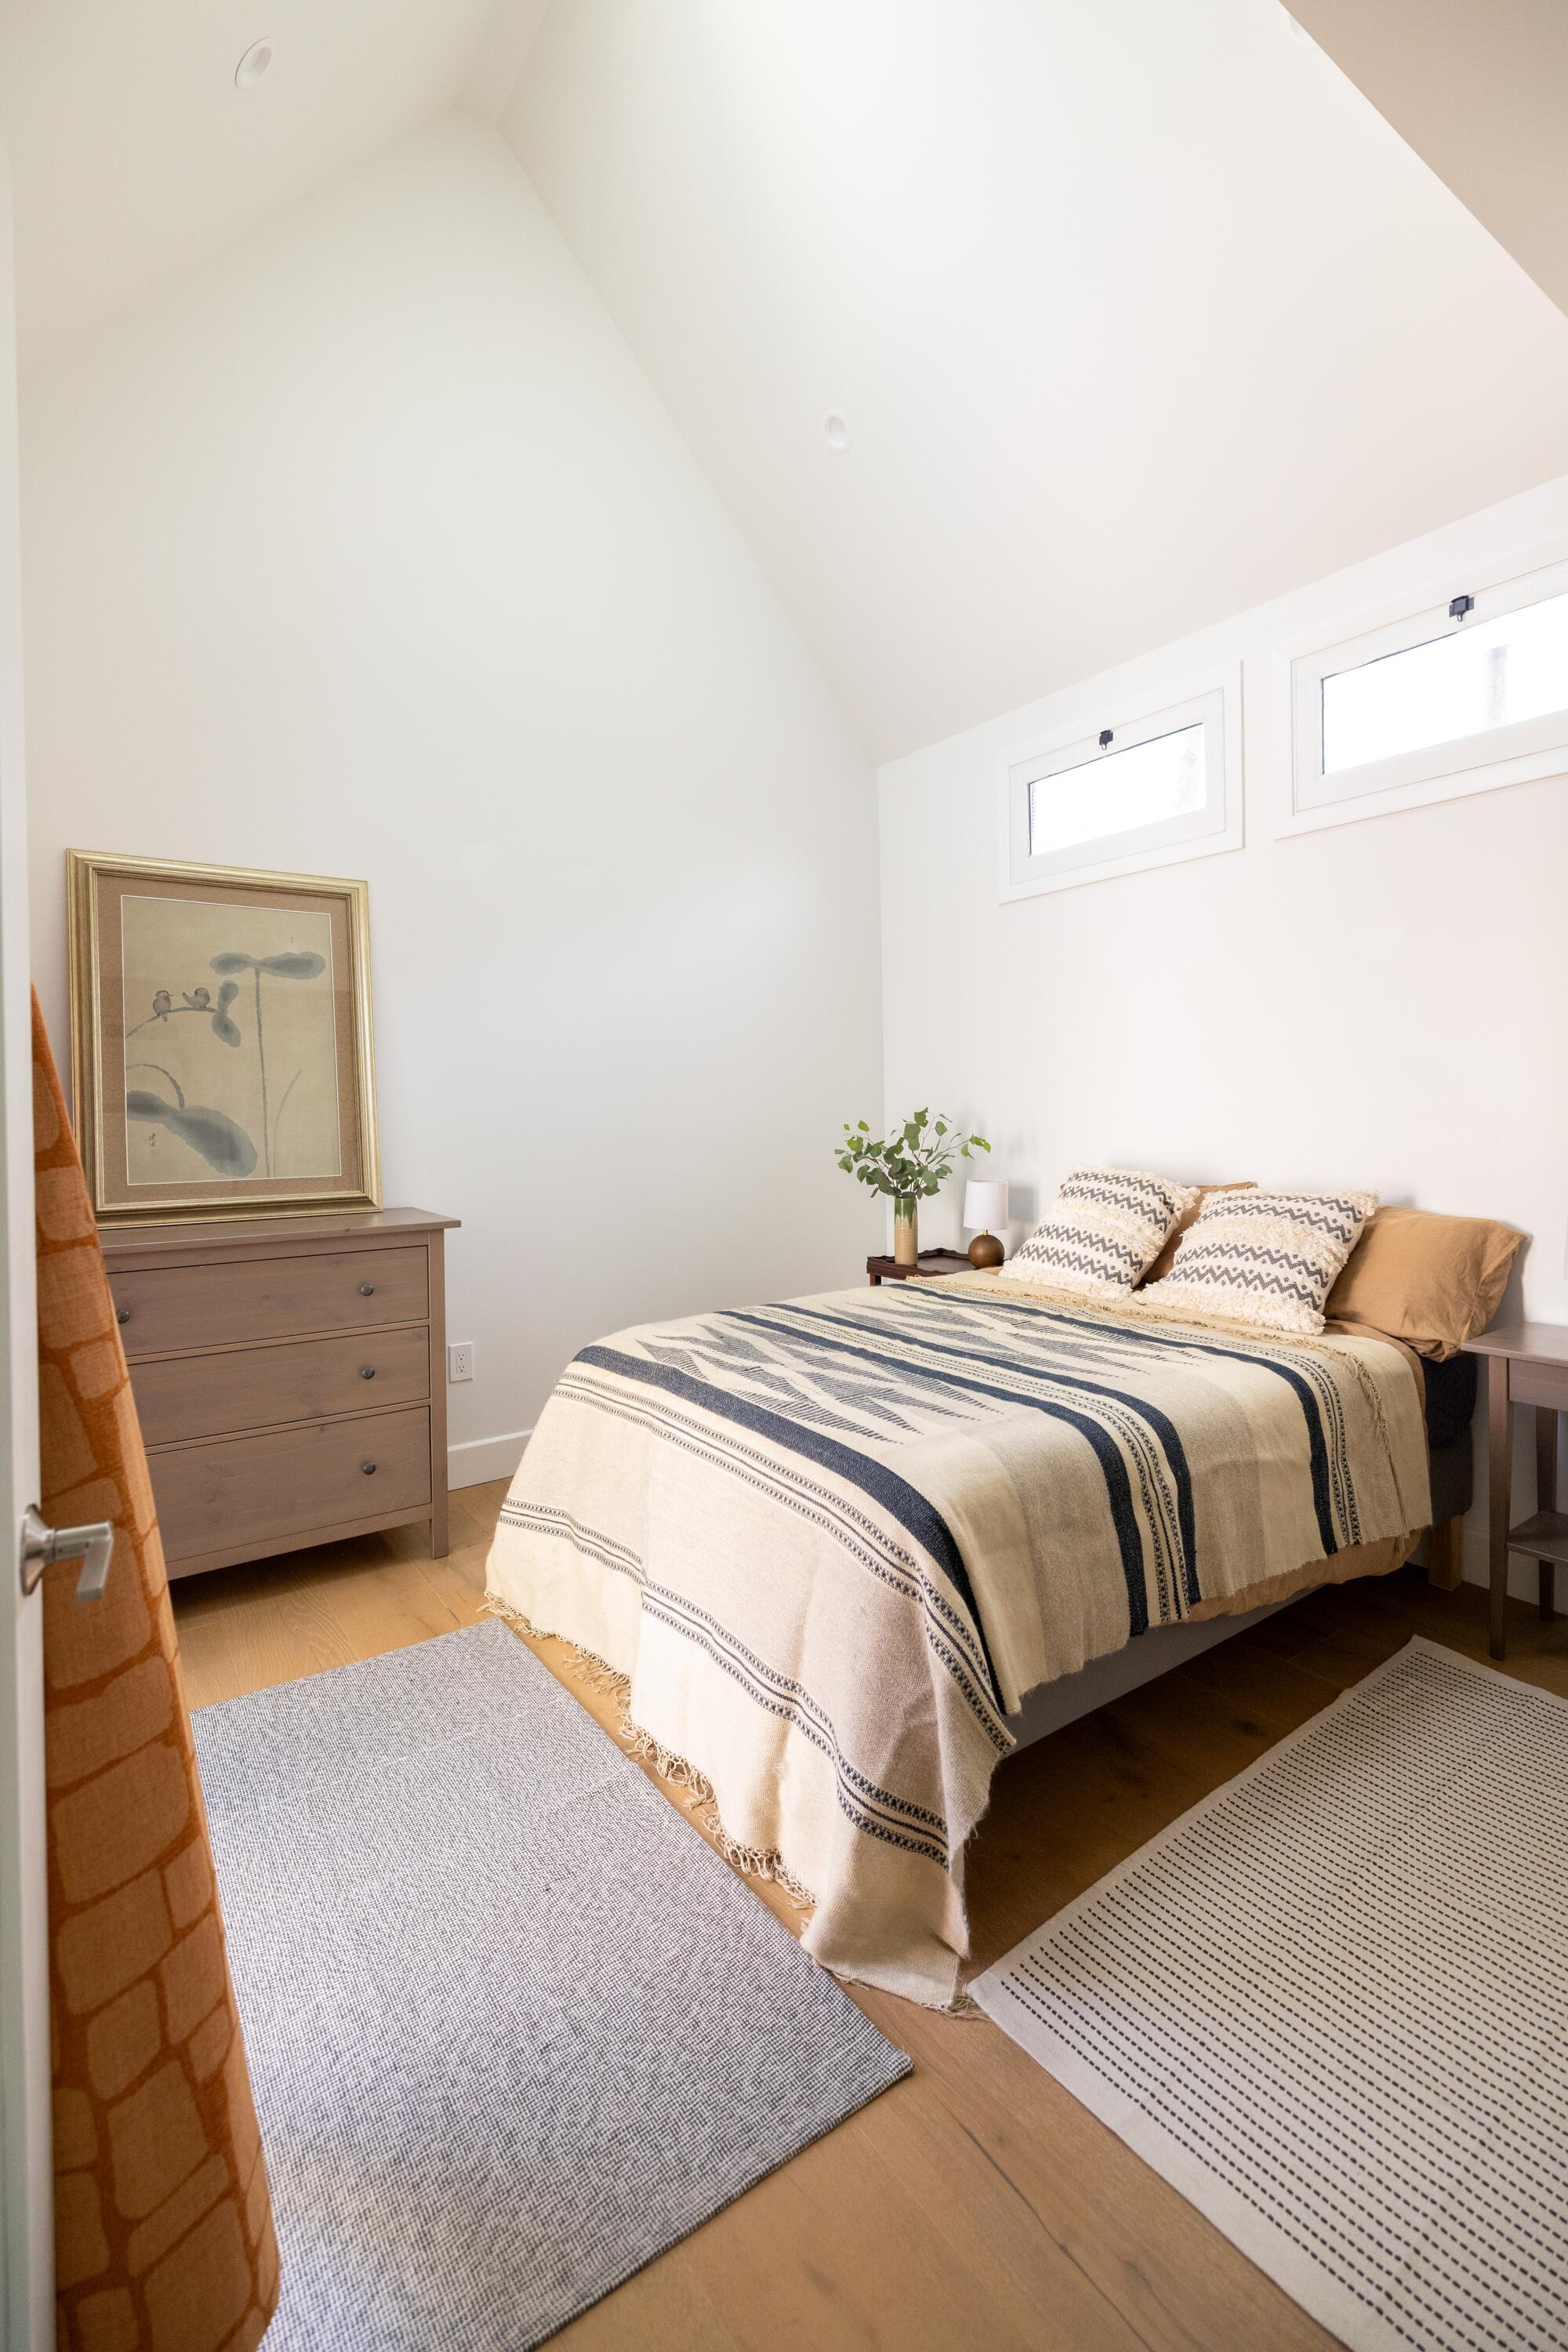 A bedroom with vaulted ceilings 